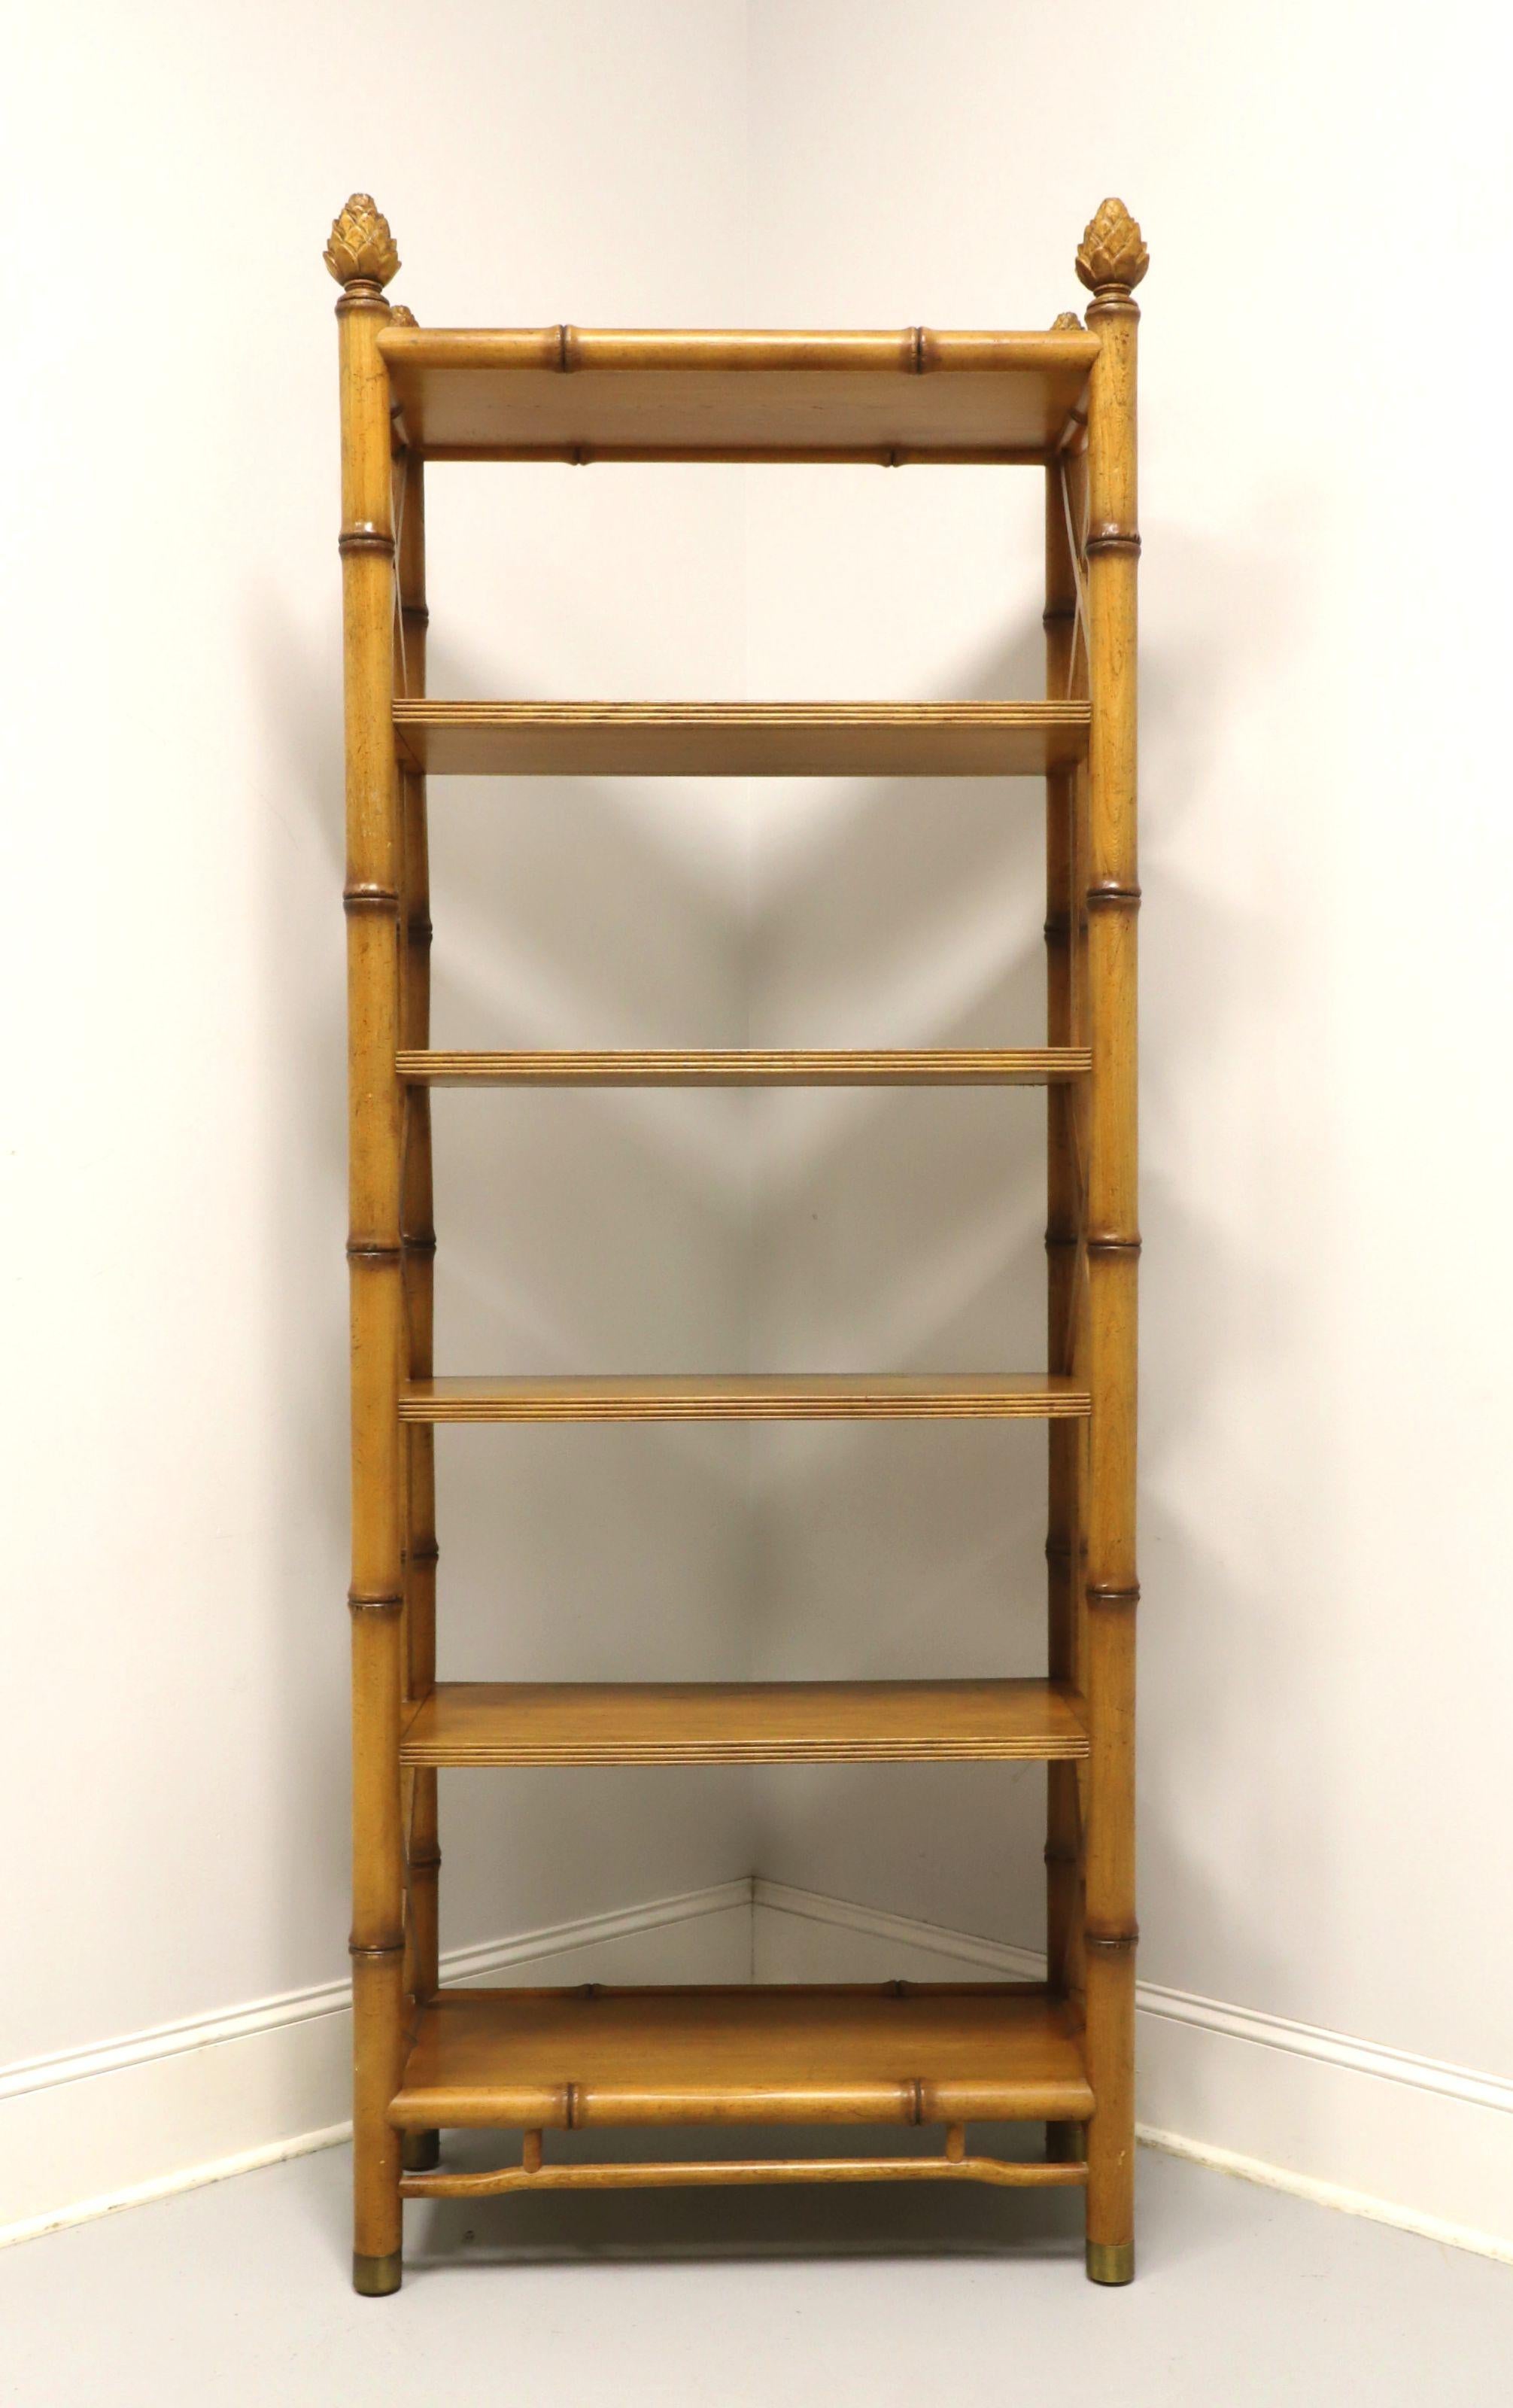 American BAKER 1960's Faux Bamboo Etagere Display Shelving Unit - C